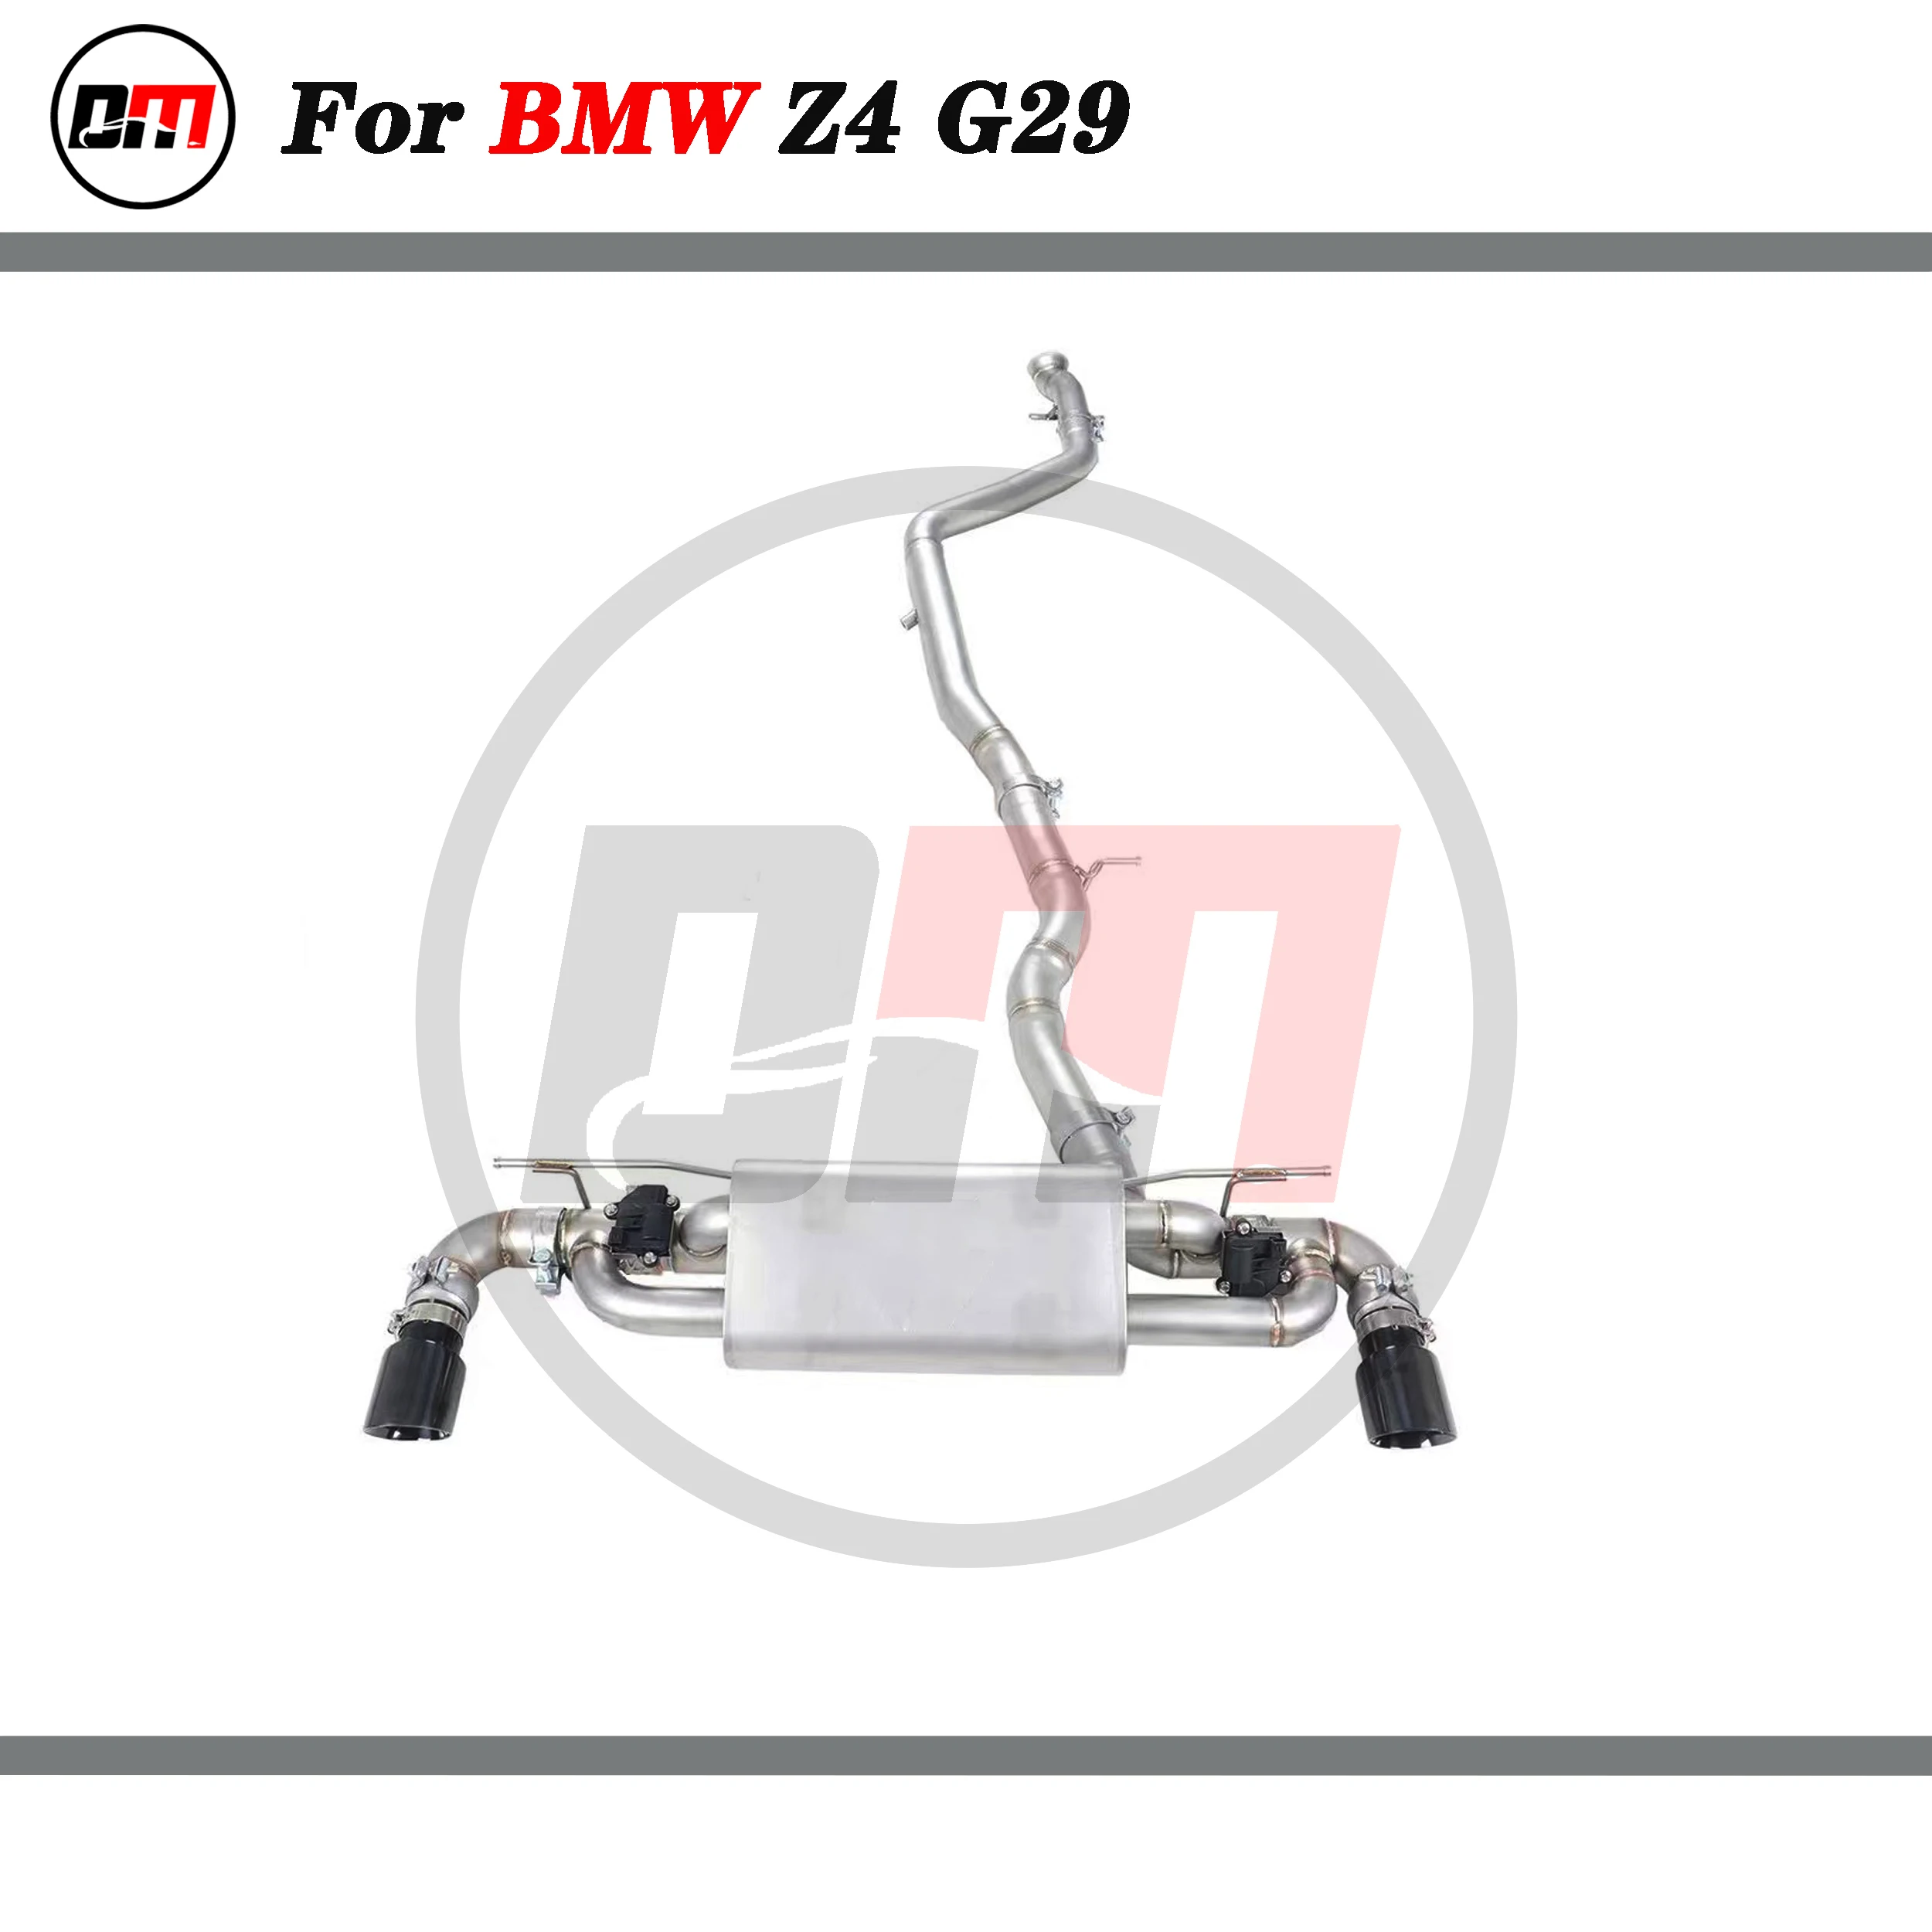 

DM exhaust stainless steel catback exhaust system for bmw z4 g29 2.0t catback pipe tips with valve muffler performance